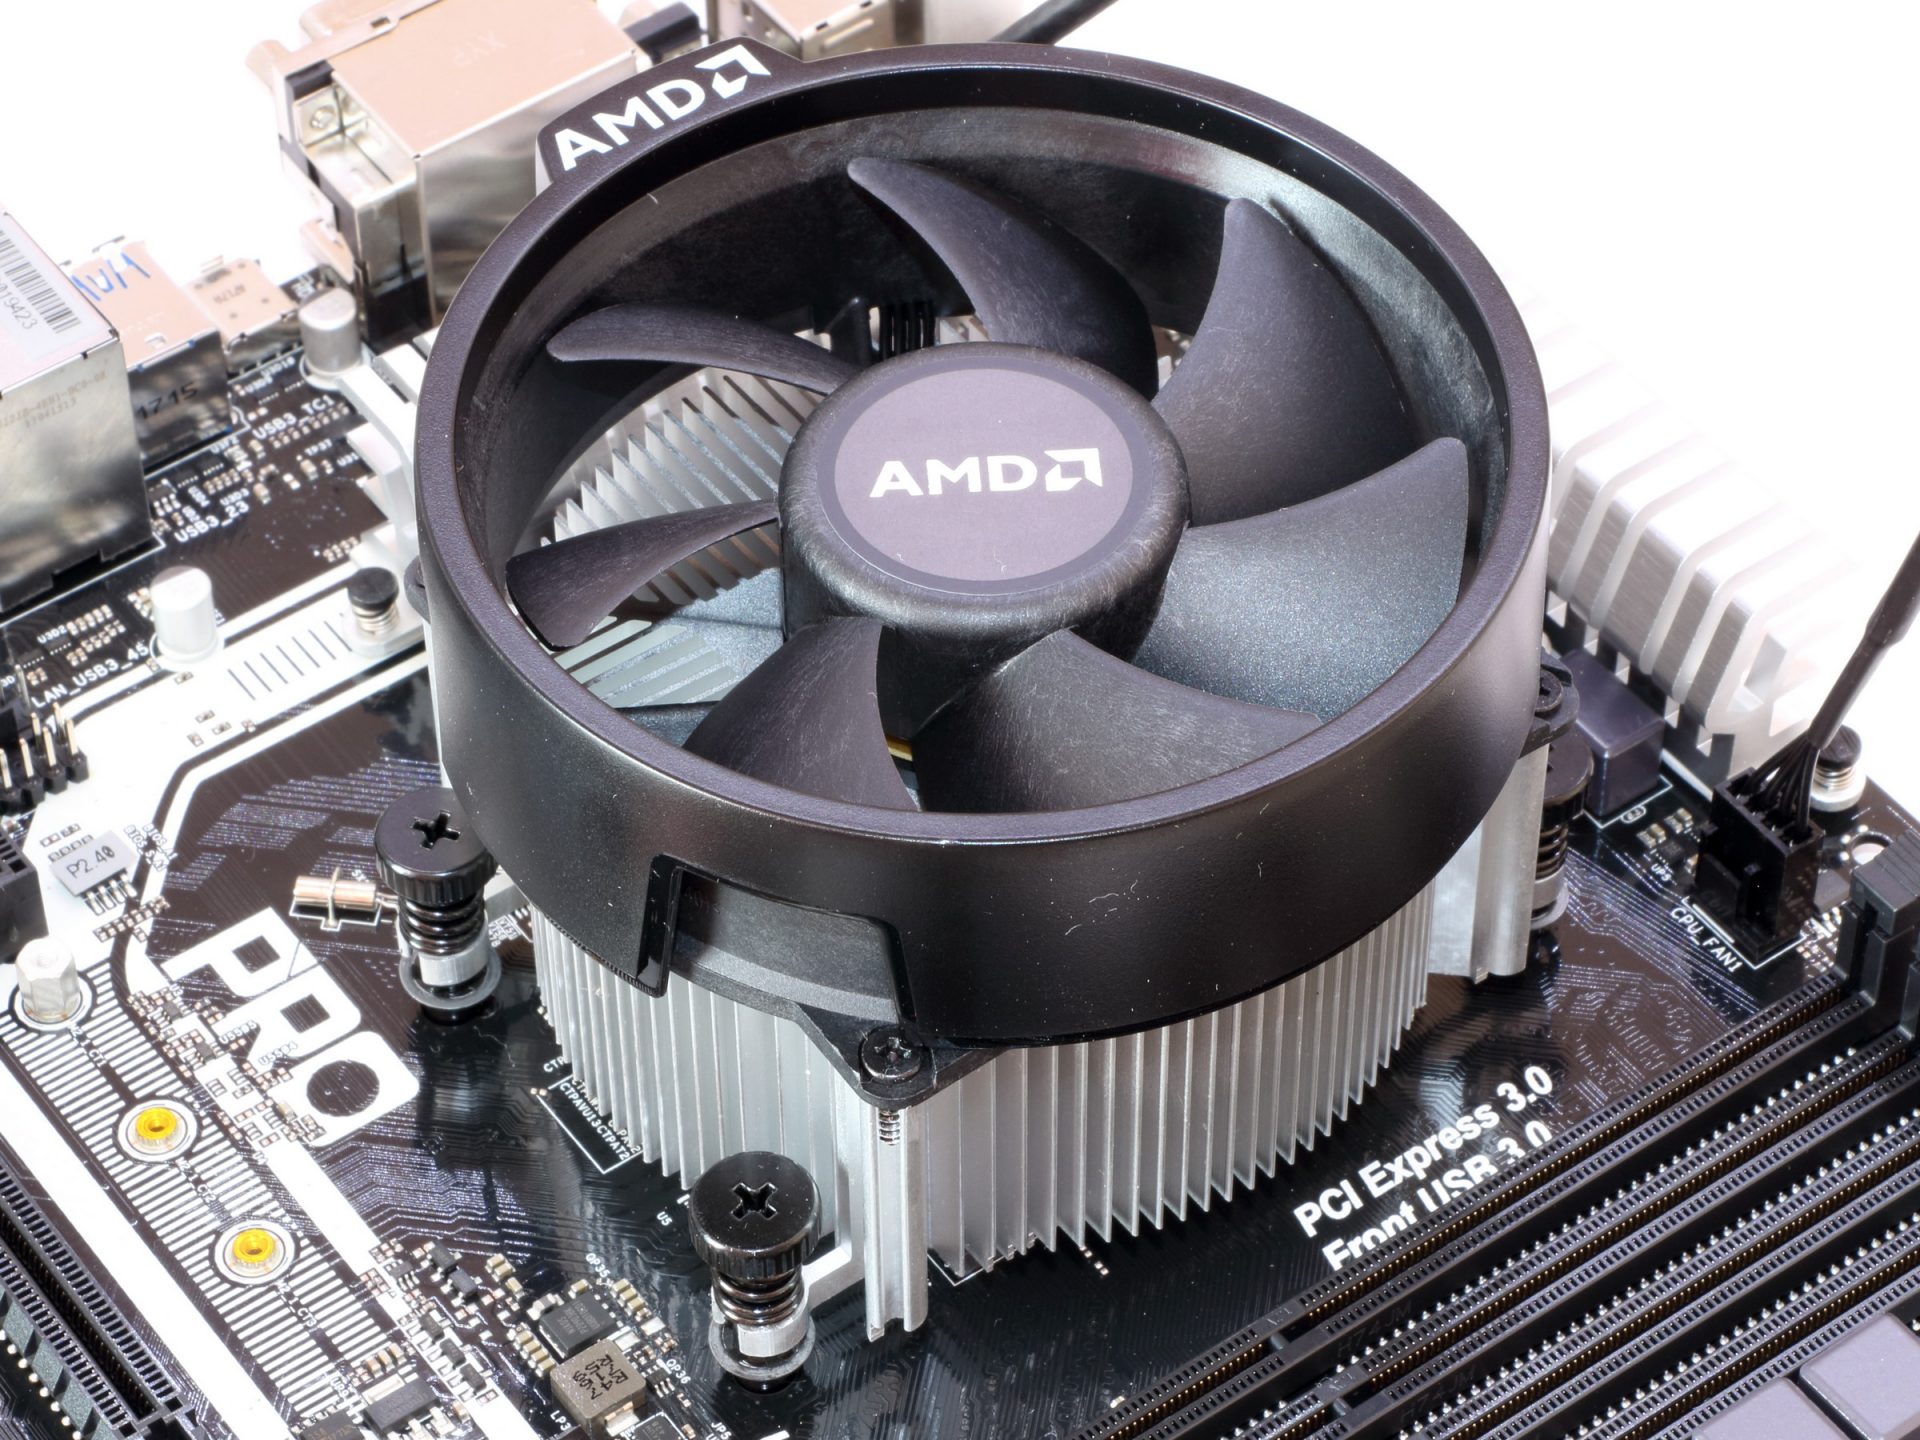 Close up image of an AMD Wraith cooler attached to a motherboard